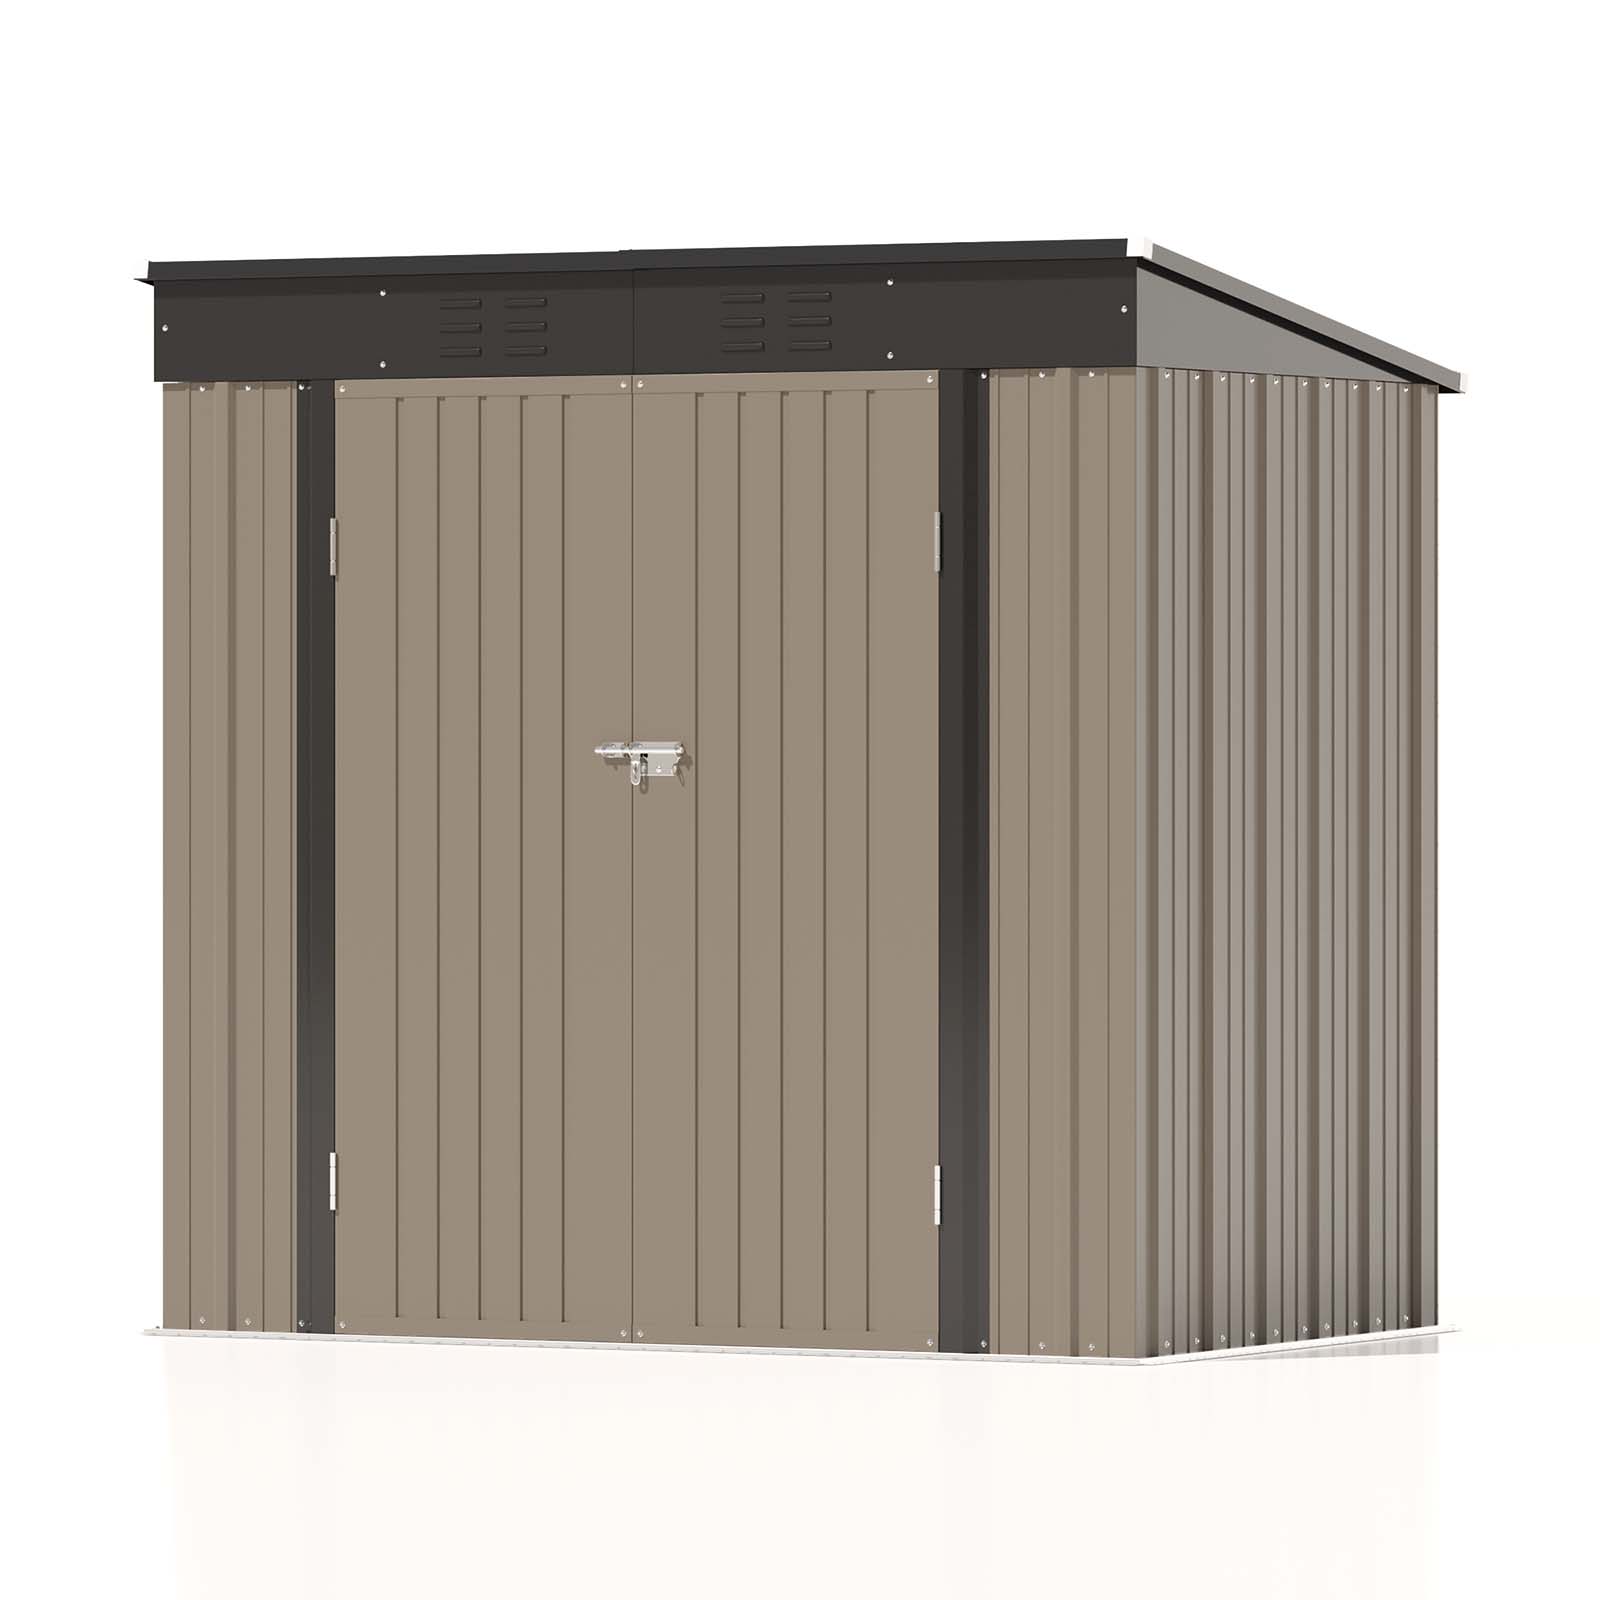 Patiowell 6x4 Metal Shed-1